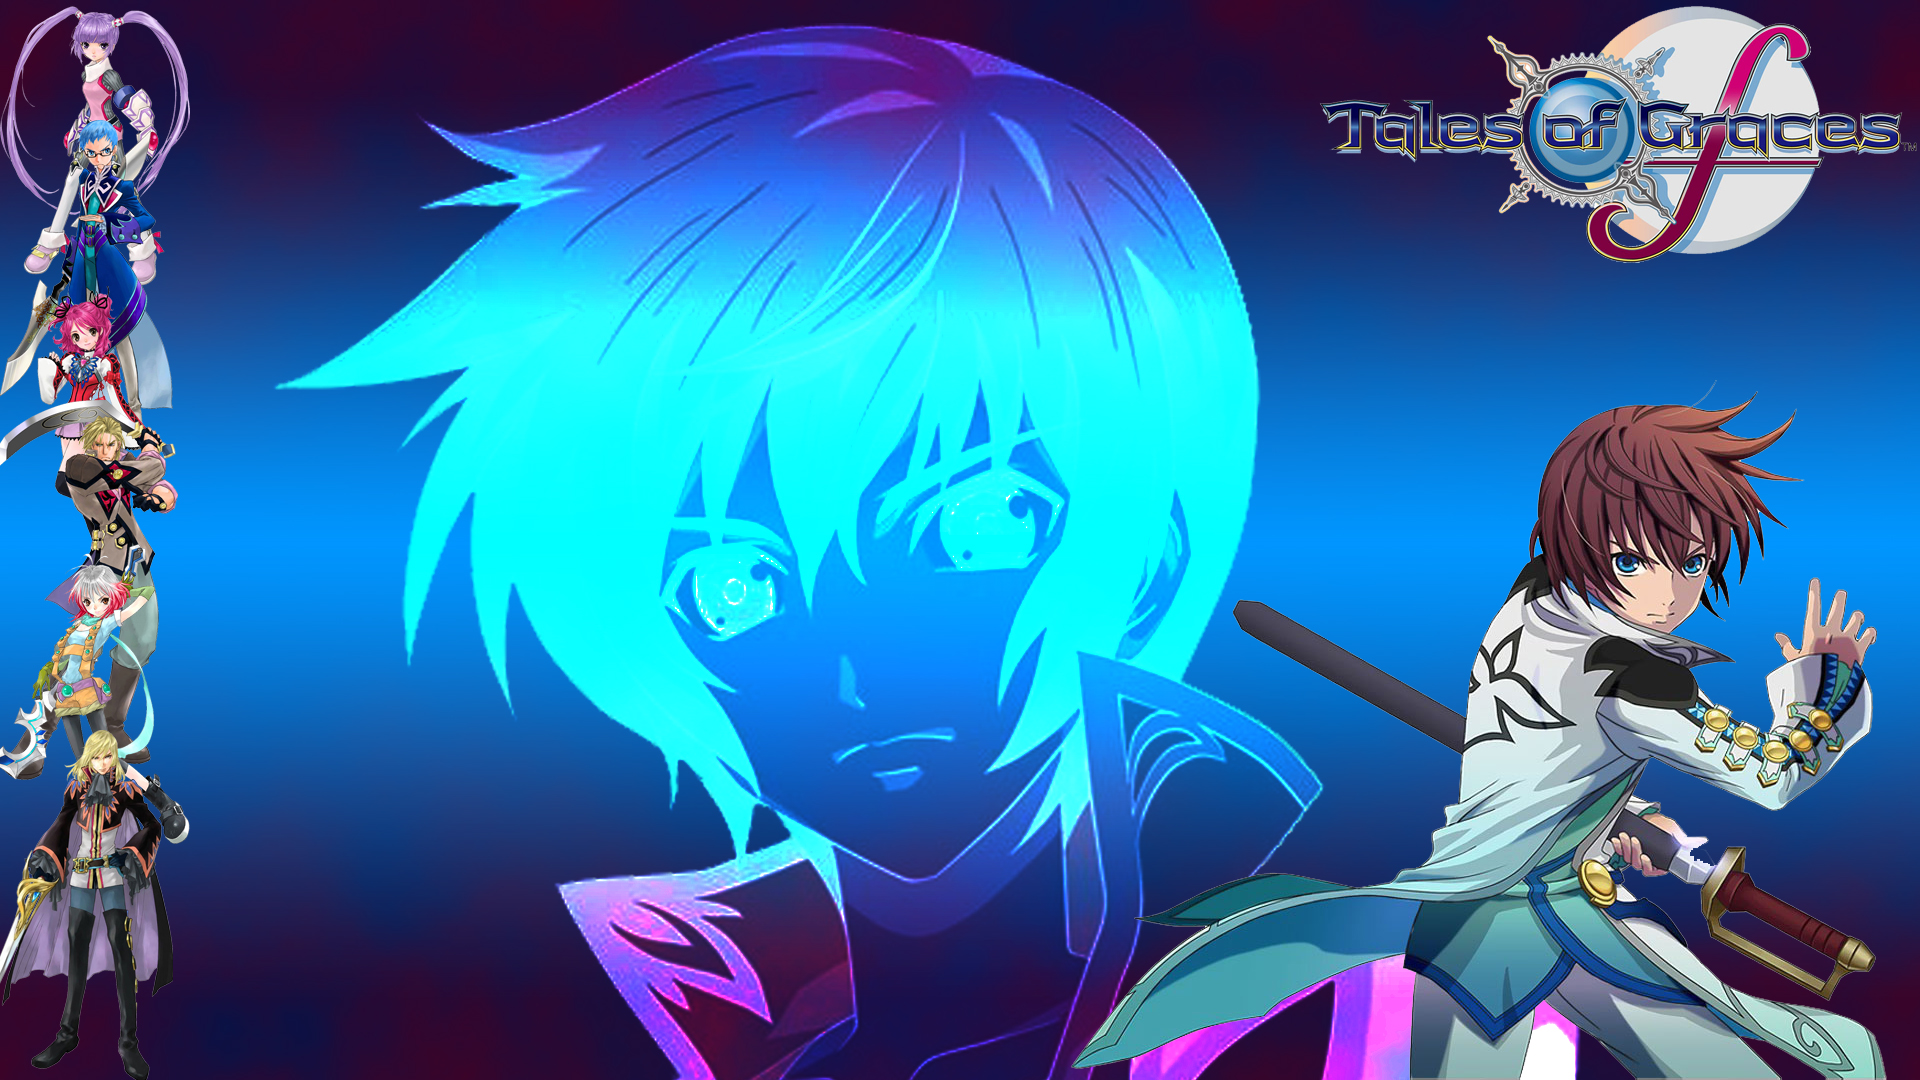 Lucky Tales Of Graces Asbel By Mrjechgo